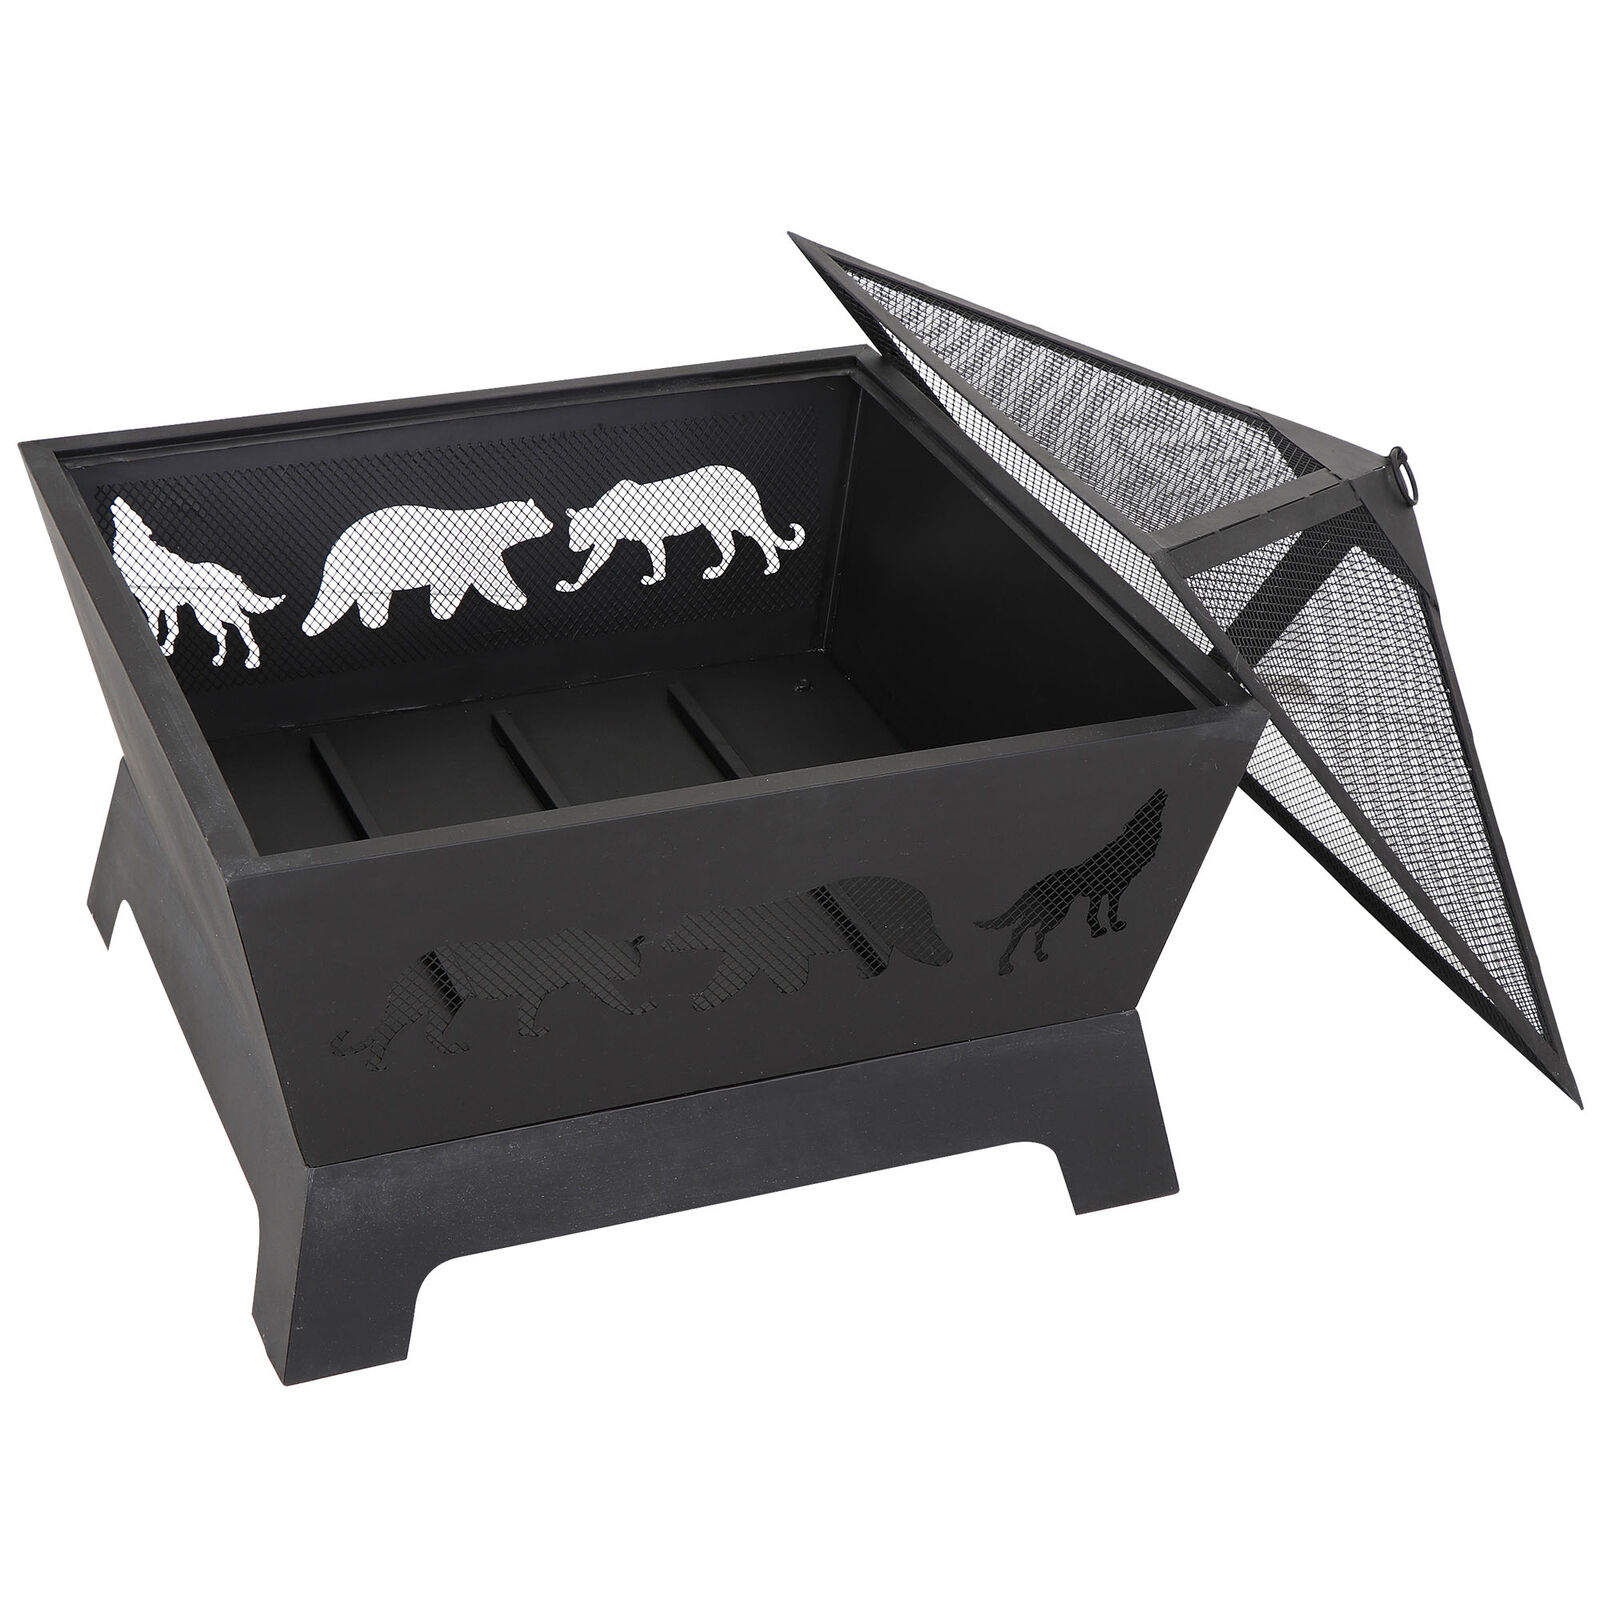 ZENSTYLE Barrone Fire Pit Outdoor Patio Stove Firepit Brazier Fireplace - image 3 of 10